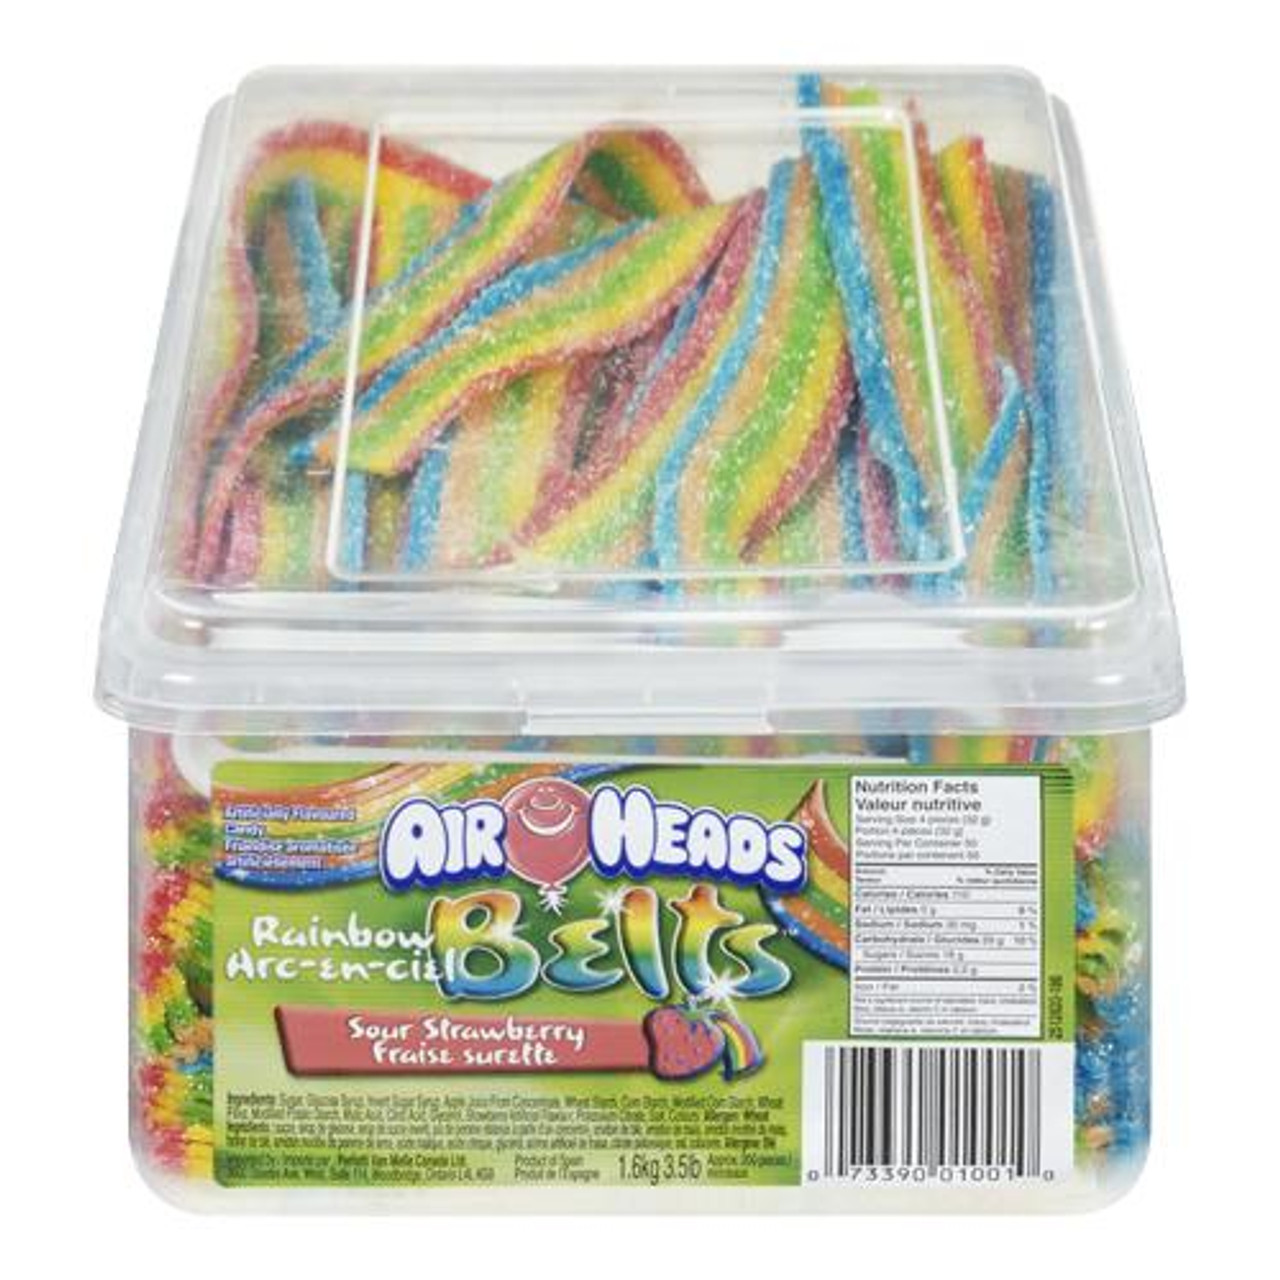  VAN MELLE Candy, Airheads Xtremes Rainbow Sour Belts 1.6kg/3.52 lbs 